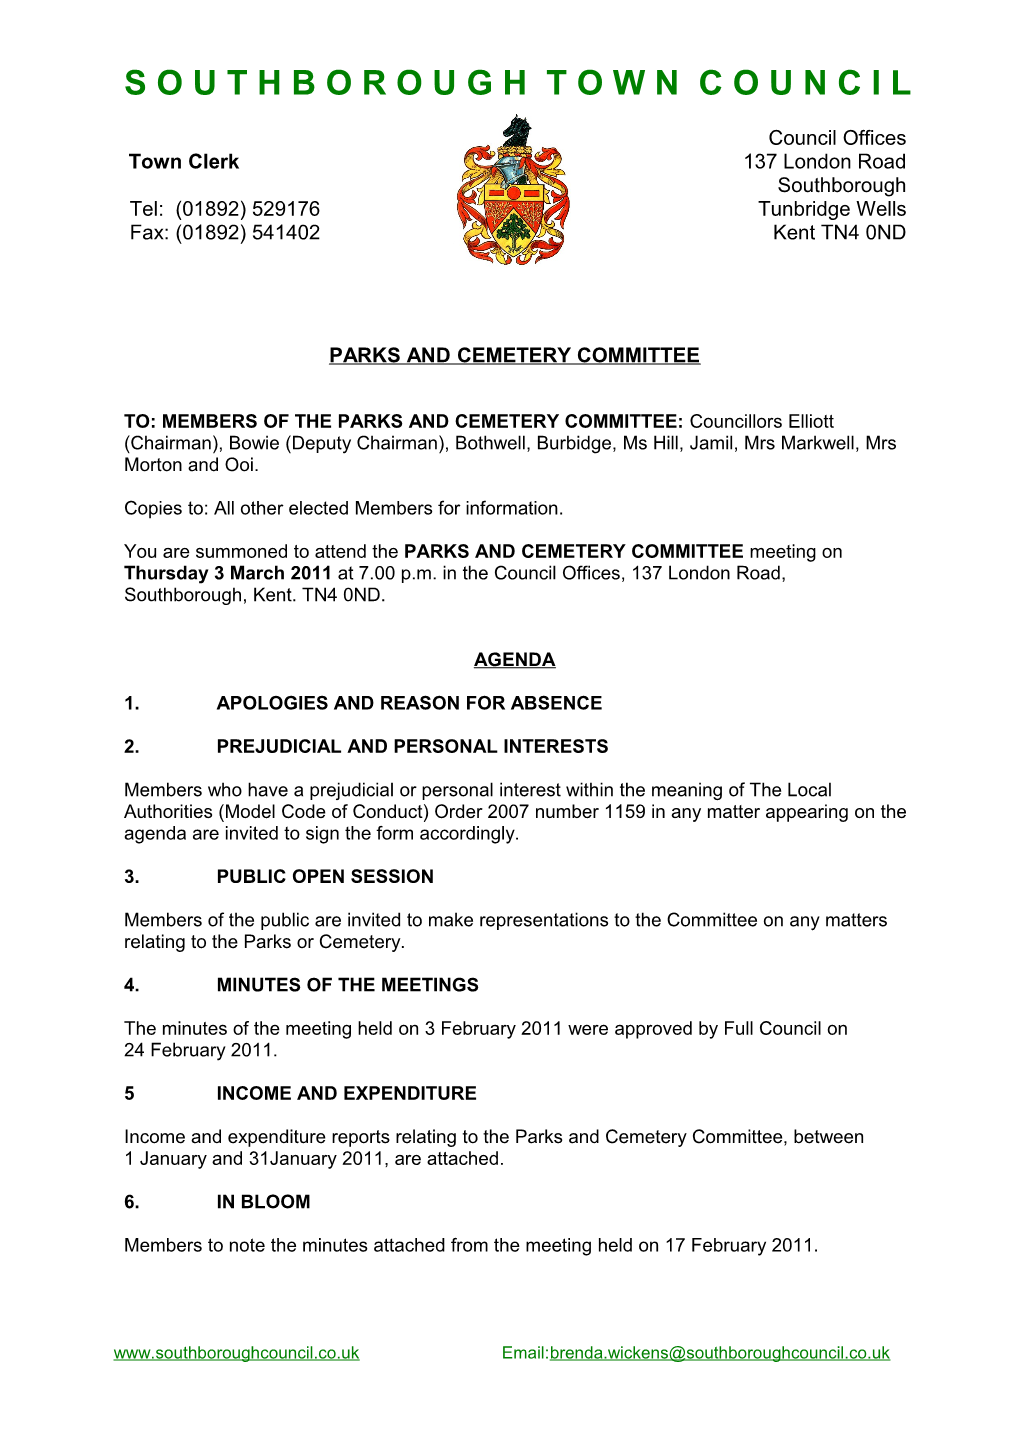 Parks and Cemetery Committee